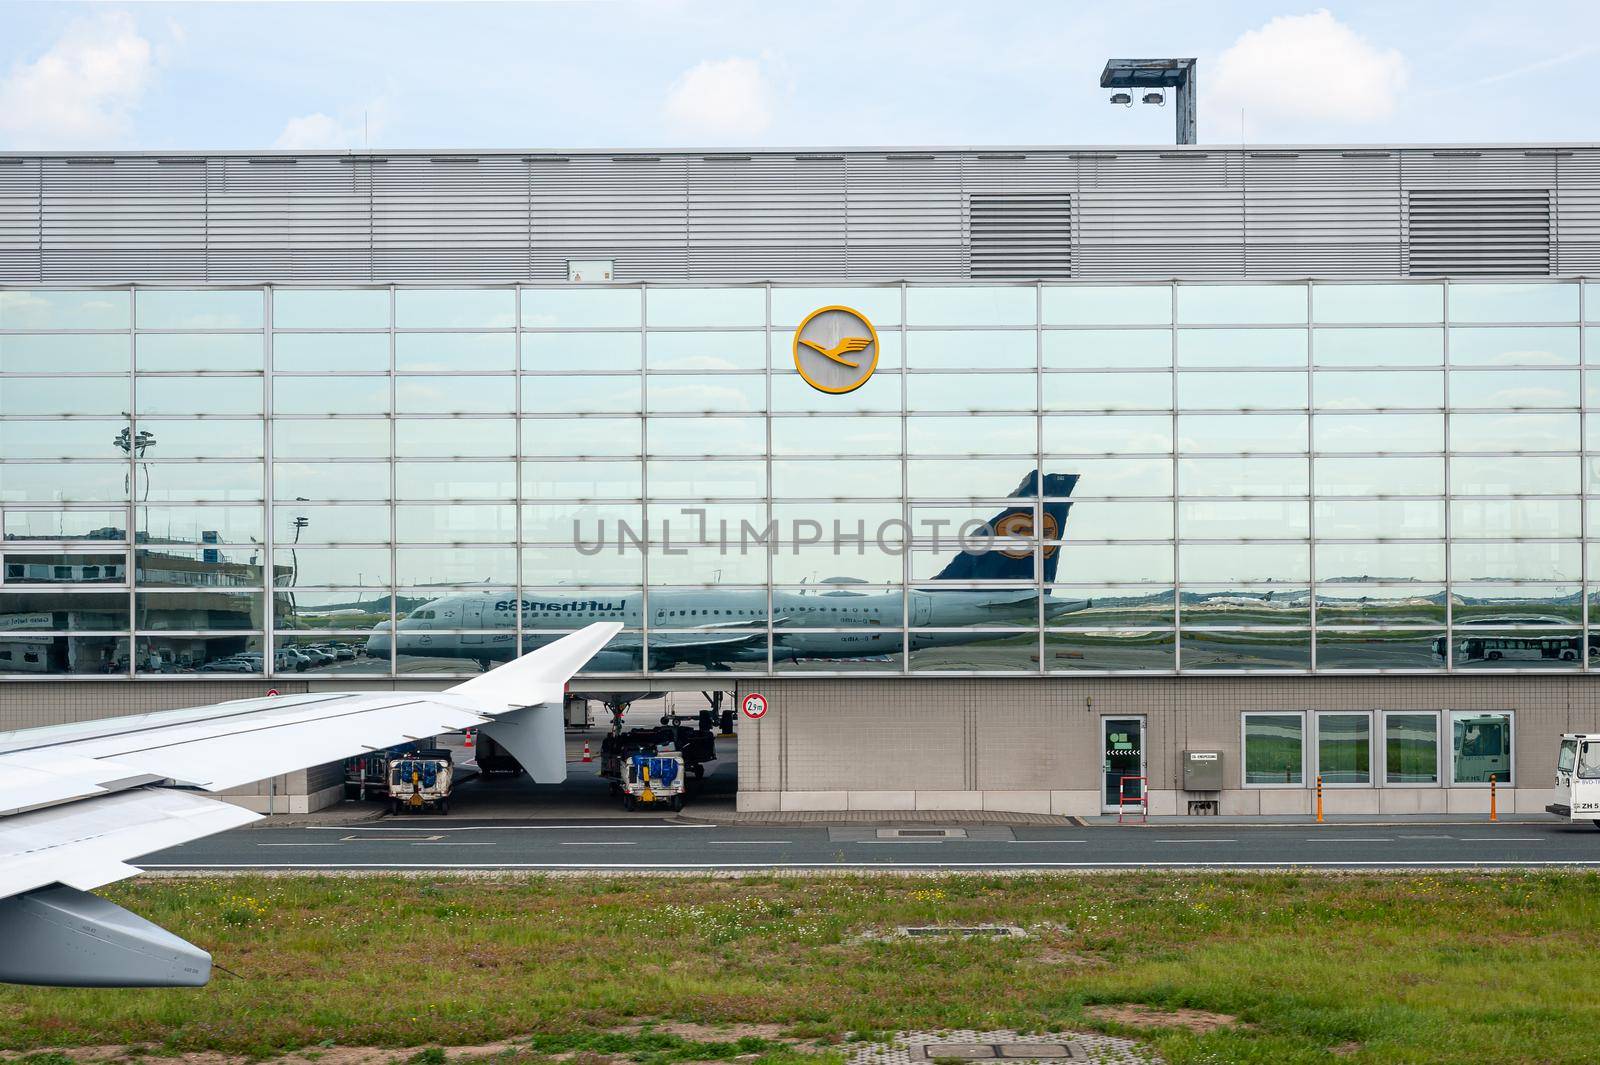 05/26/2019. Frankfurt Airport, Germany. Operated by Fraport and serves as the main hub for Lufthansa including Lufthansa City Line and Lufthansa Cargo and Lufthansa Technik.